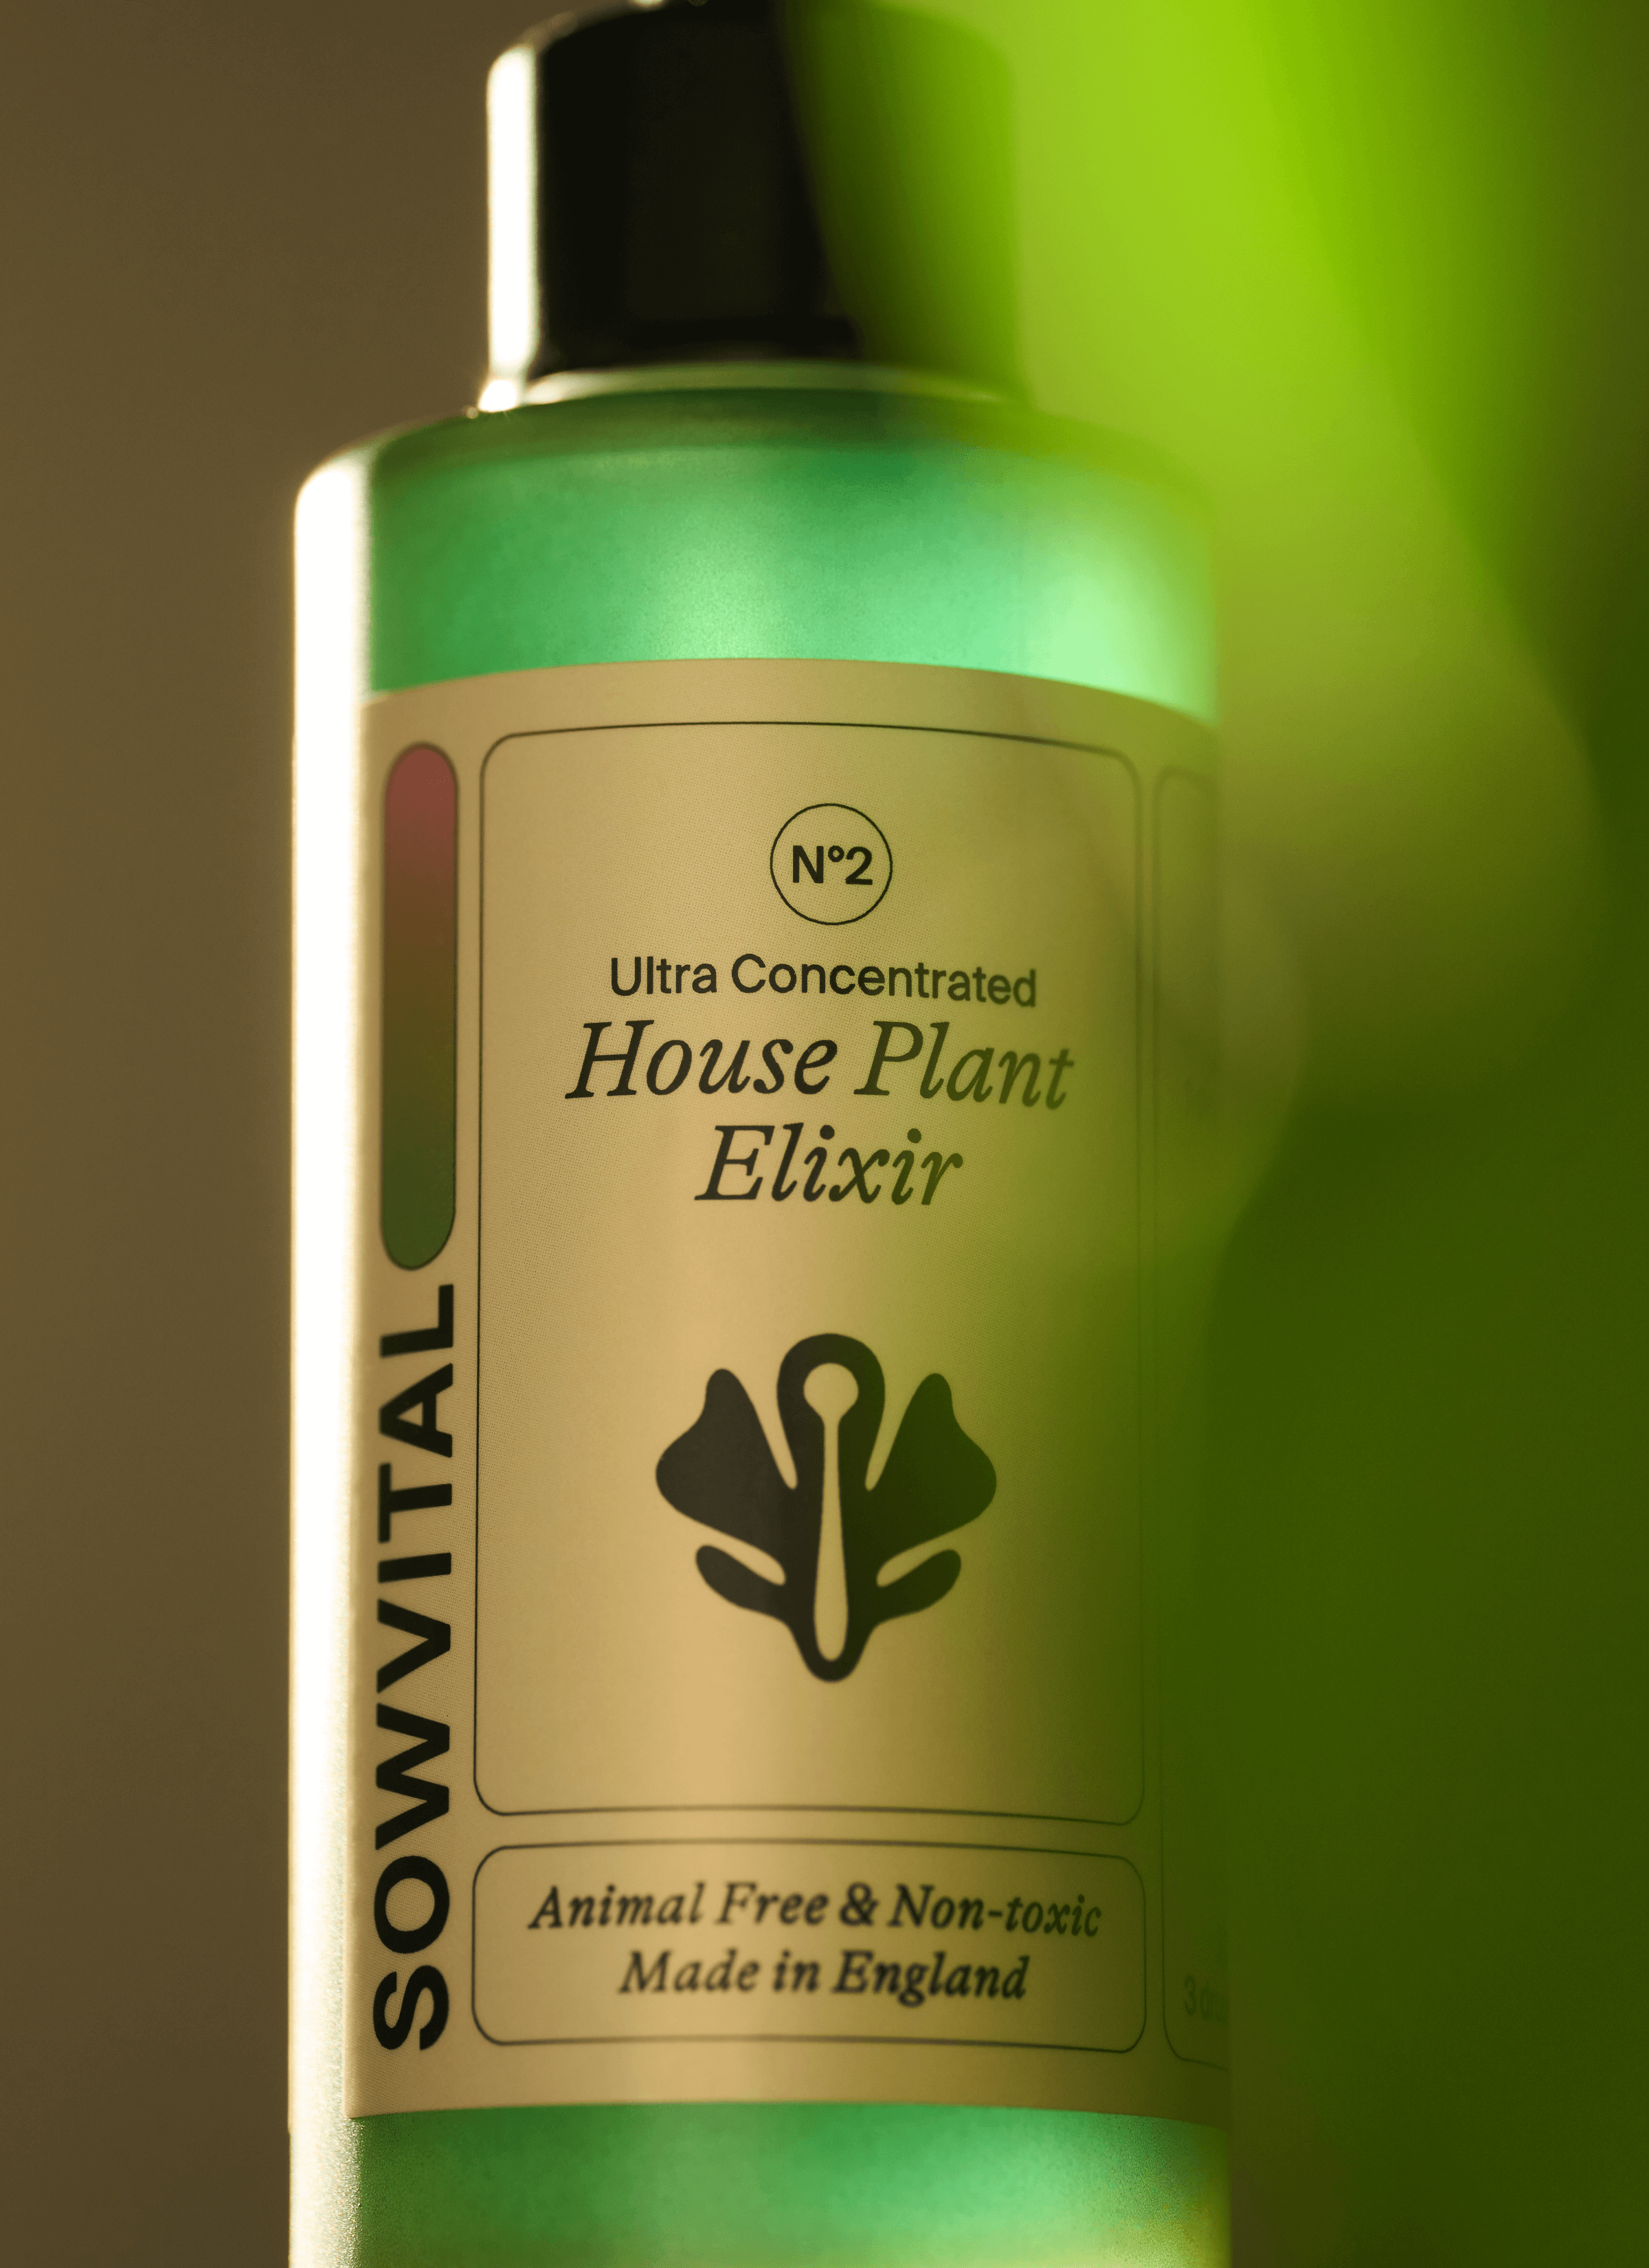 Sowvital product - House plant elixir photoshoot with some leaves.